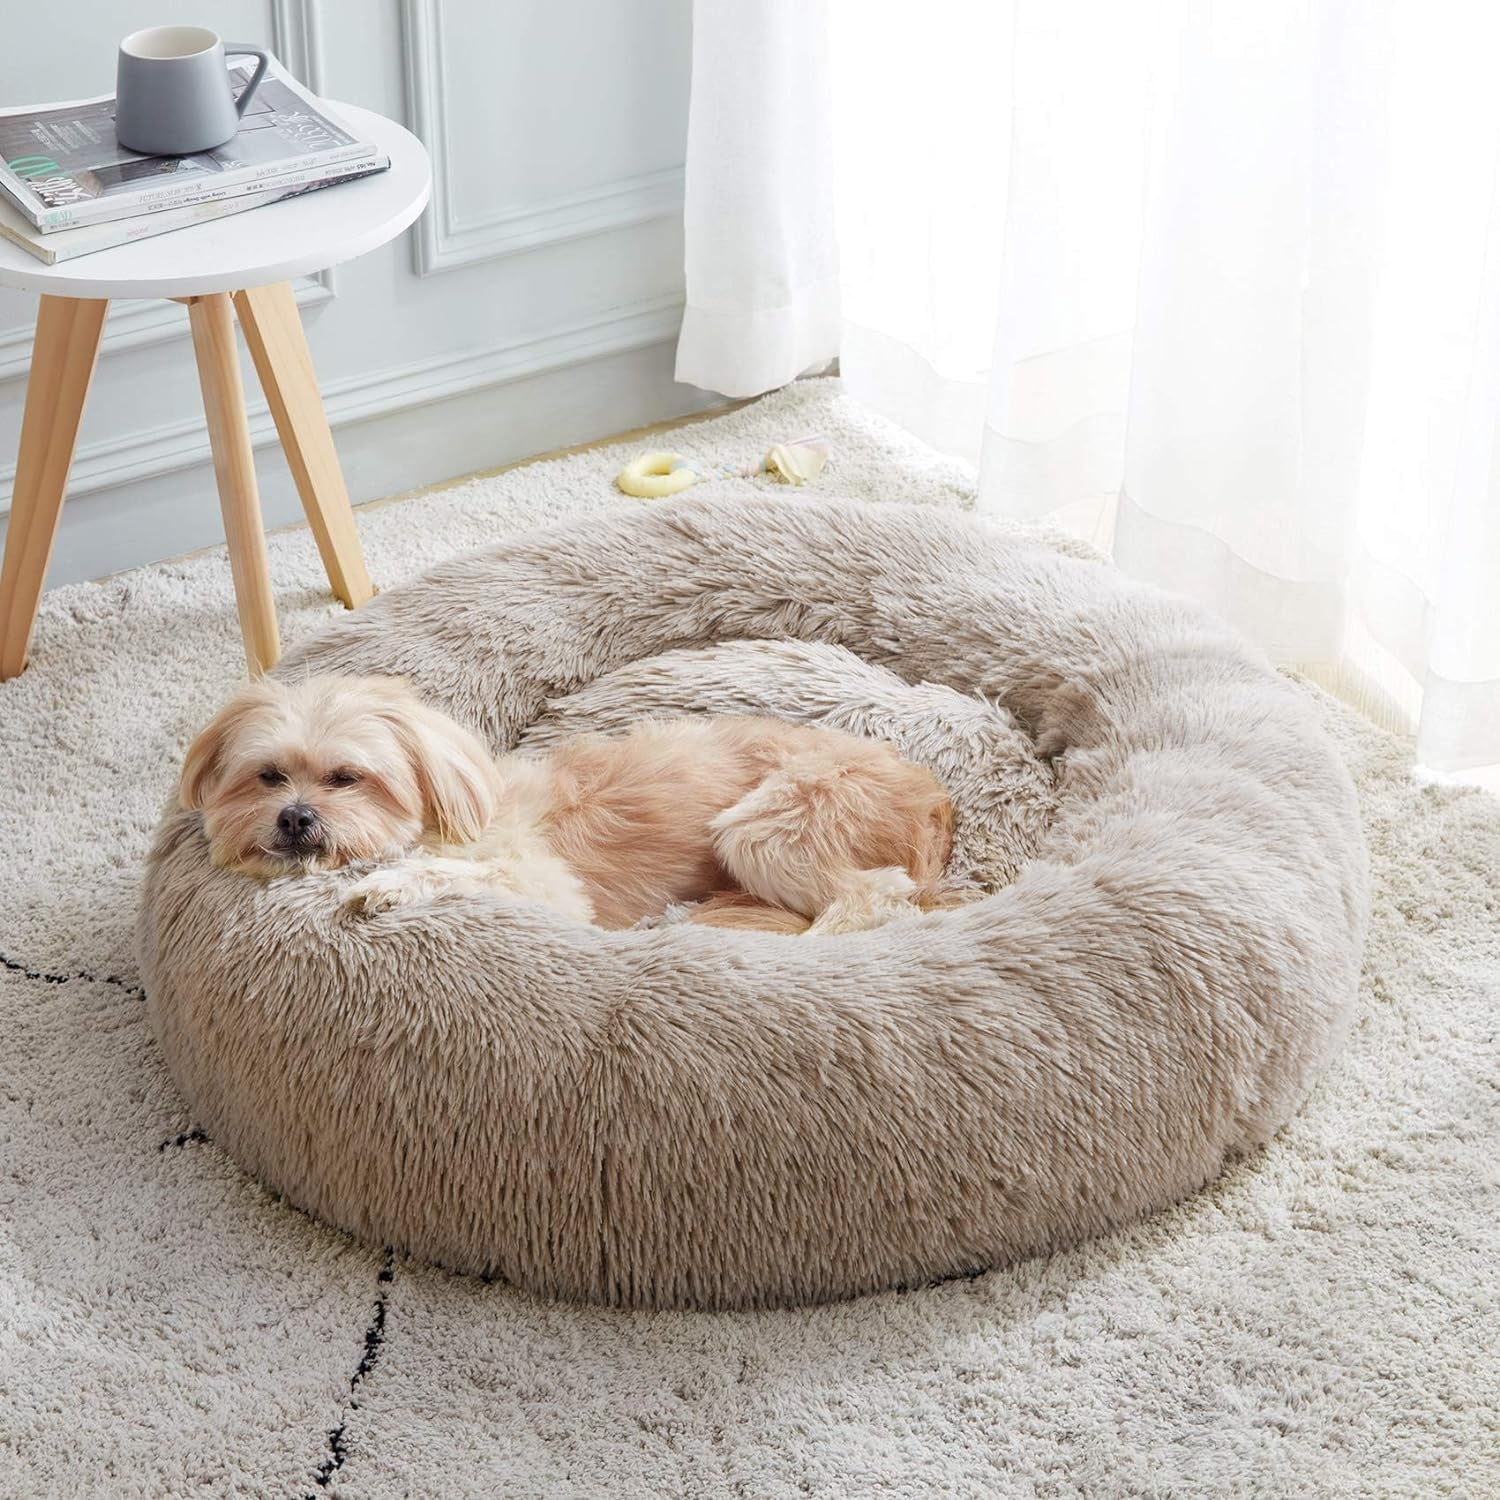 Calming Dog & Cat Bed, Anti-Anxiety Donut Cuddler Warming Cozy Soft round Bed, Fluffy Faux Fur Plush Cushion Bed for Small Medium Dogs and Cats (20